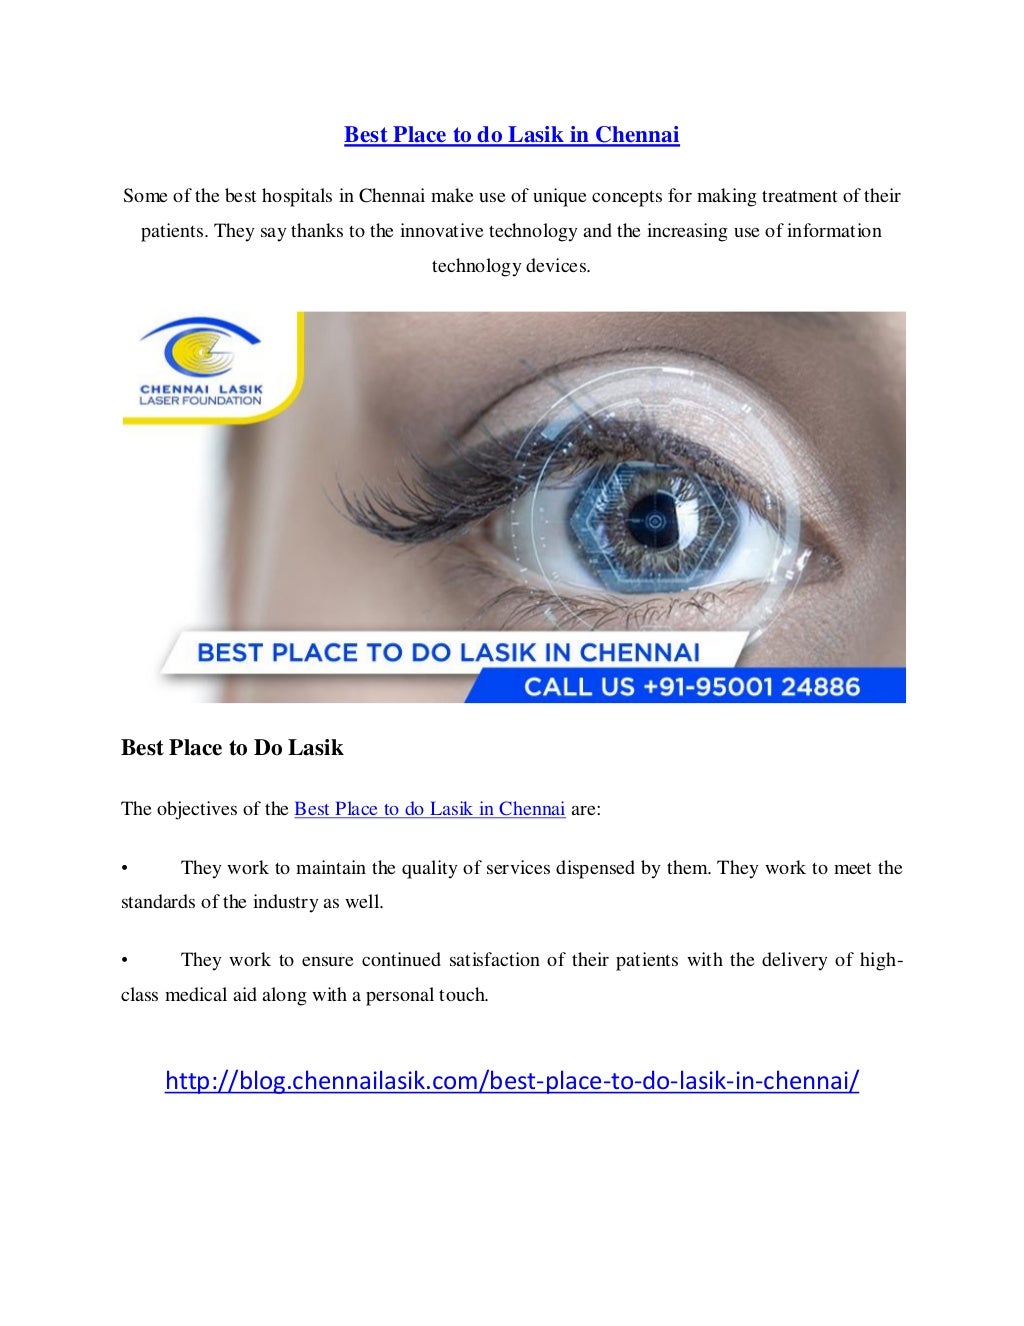 Best place to do lasik in chennai